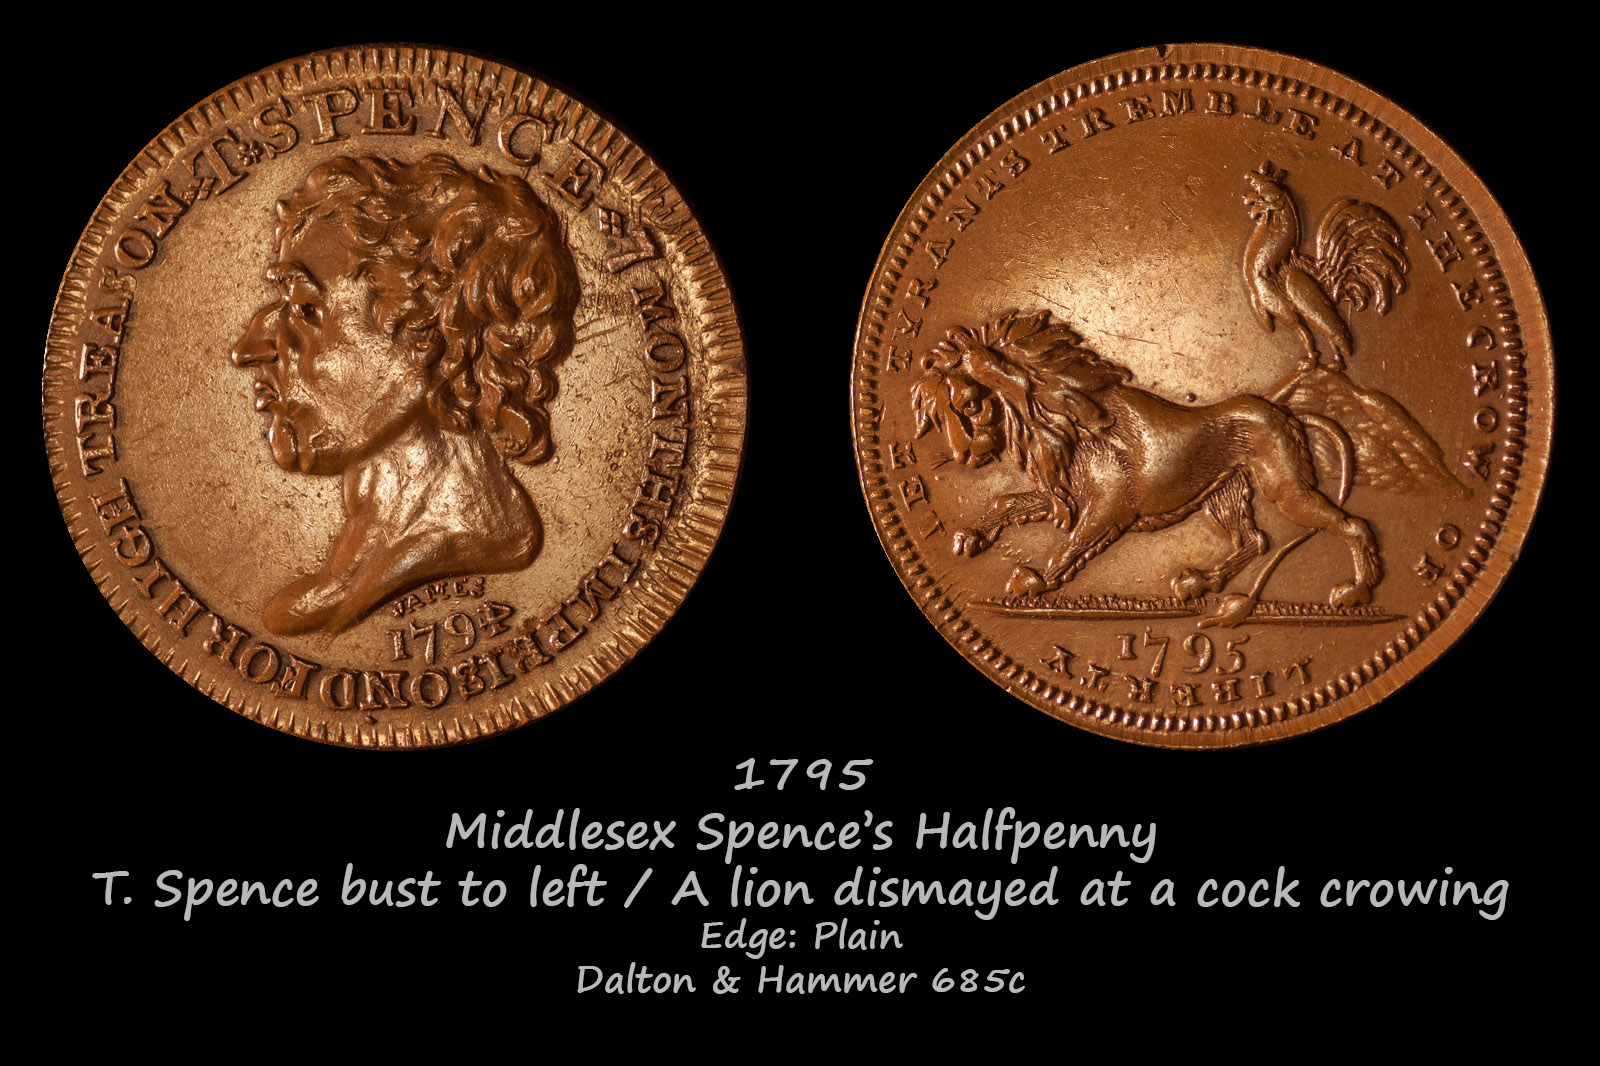 Middlesex Spence’s Halfpenny D&H685c